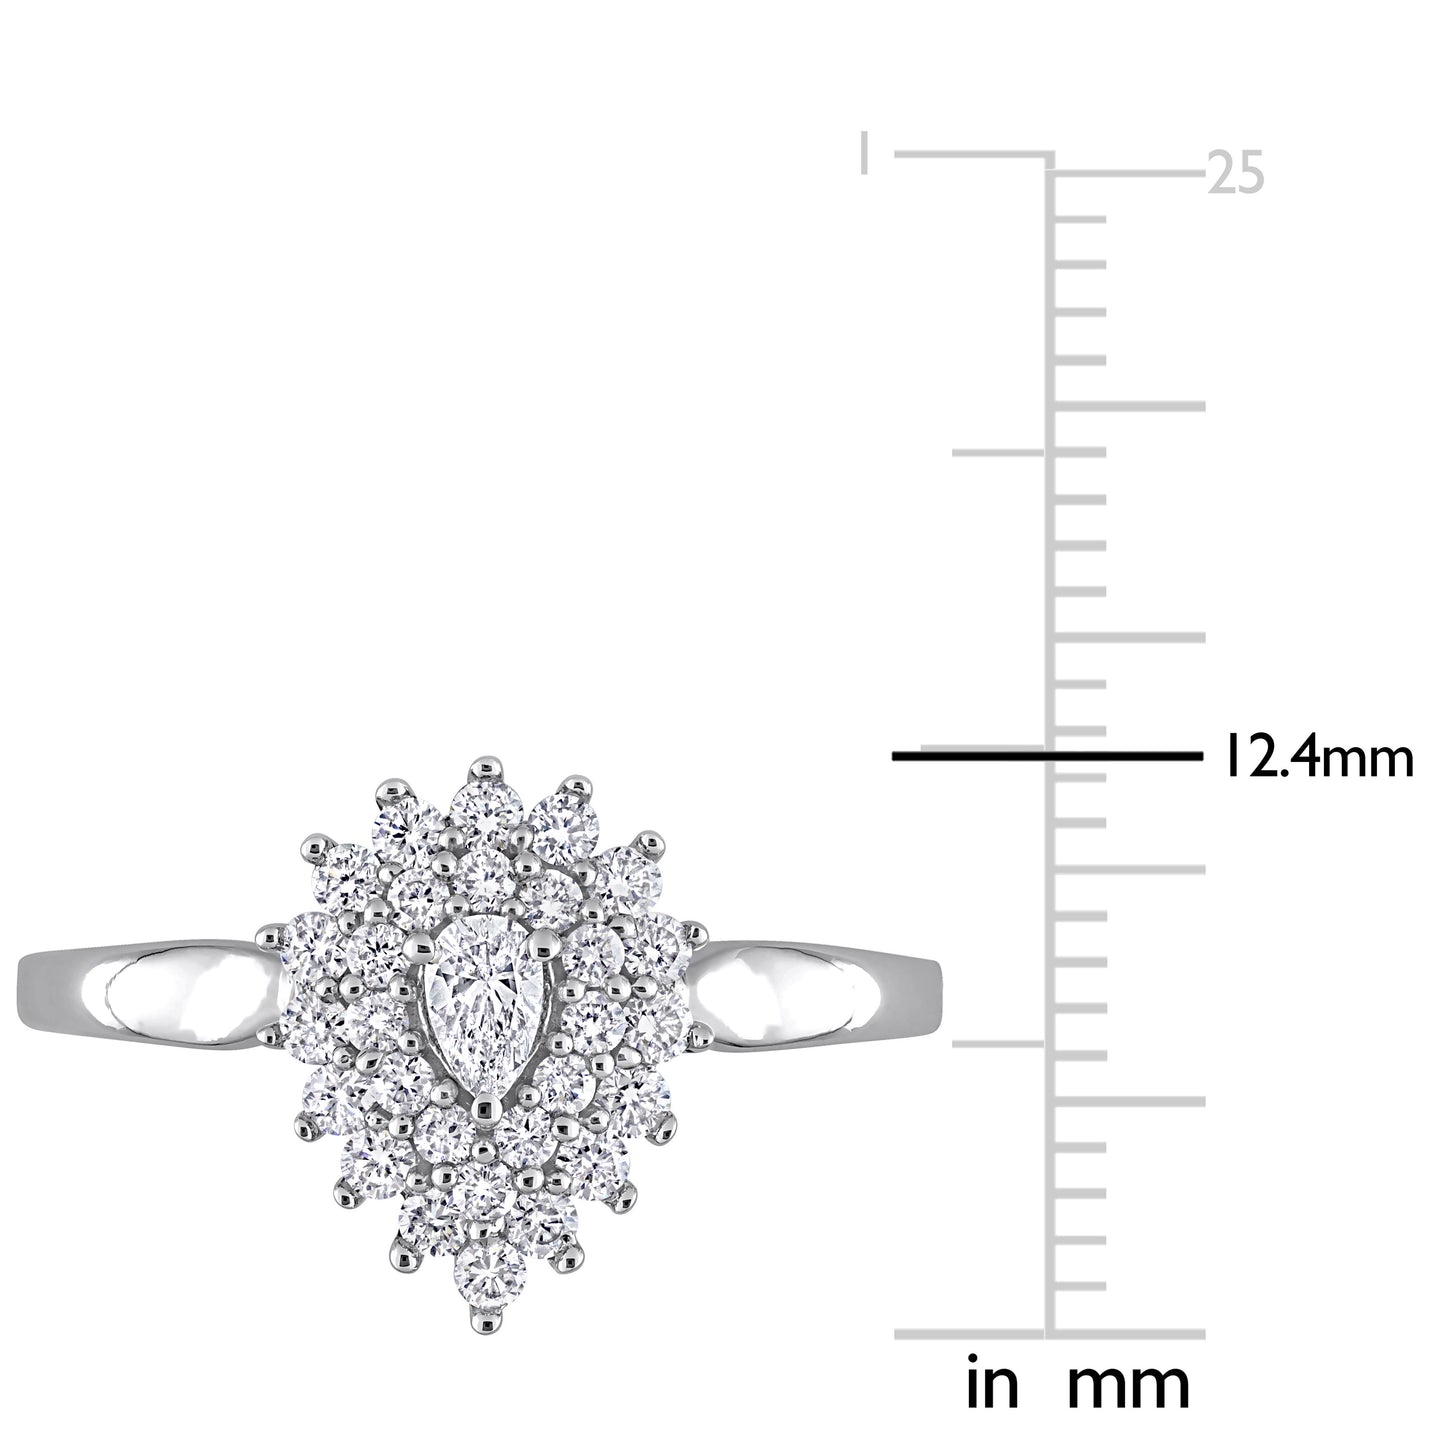 Double Halo Pear Cut Diamond Ring in 14k White Gold